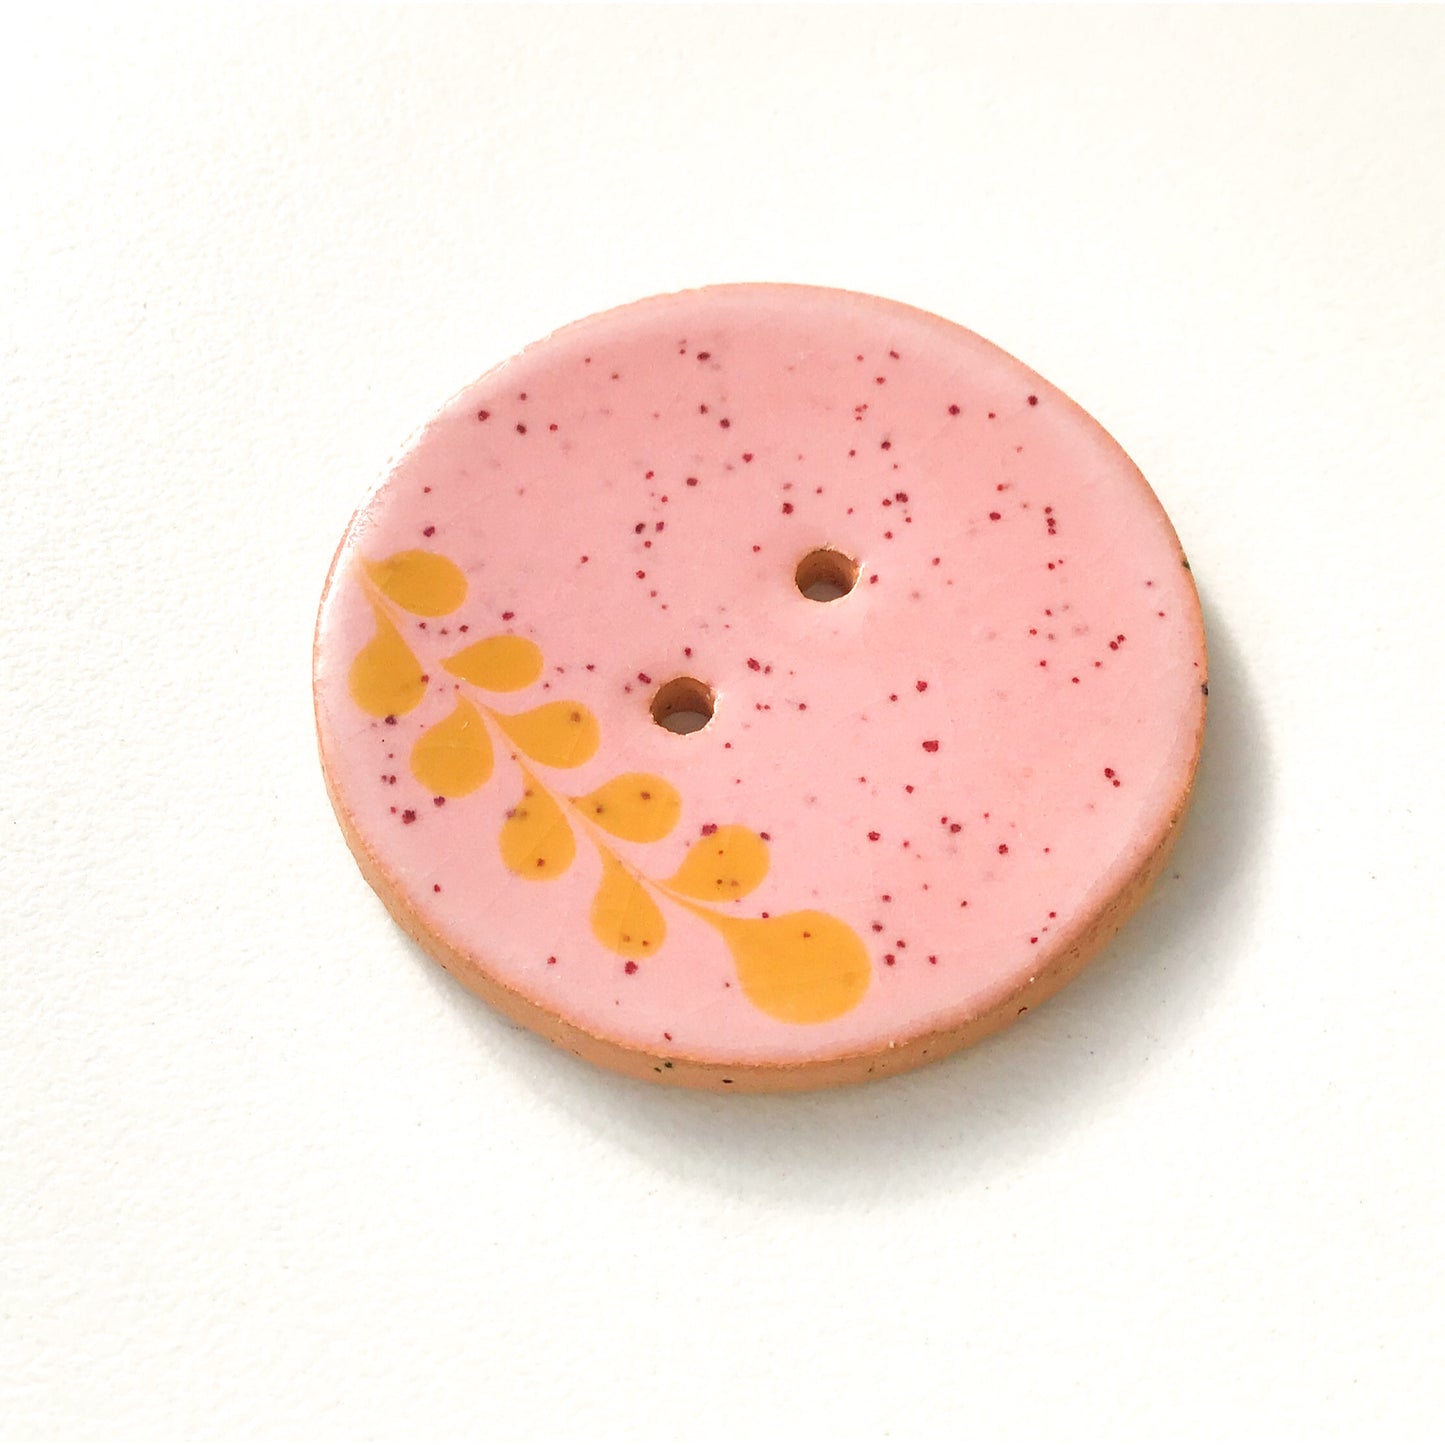 Speckled Pink Ceramic Button with Light Brown Detail - Decorative Ceramic Button - 1 3/8"